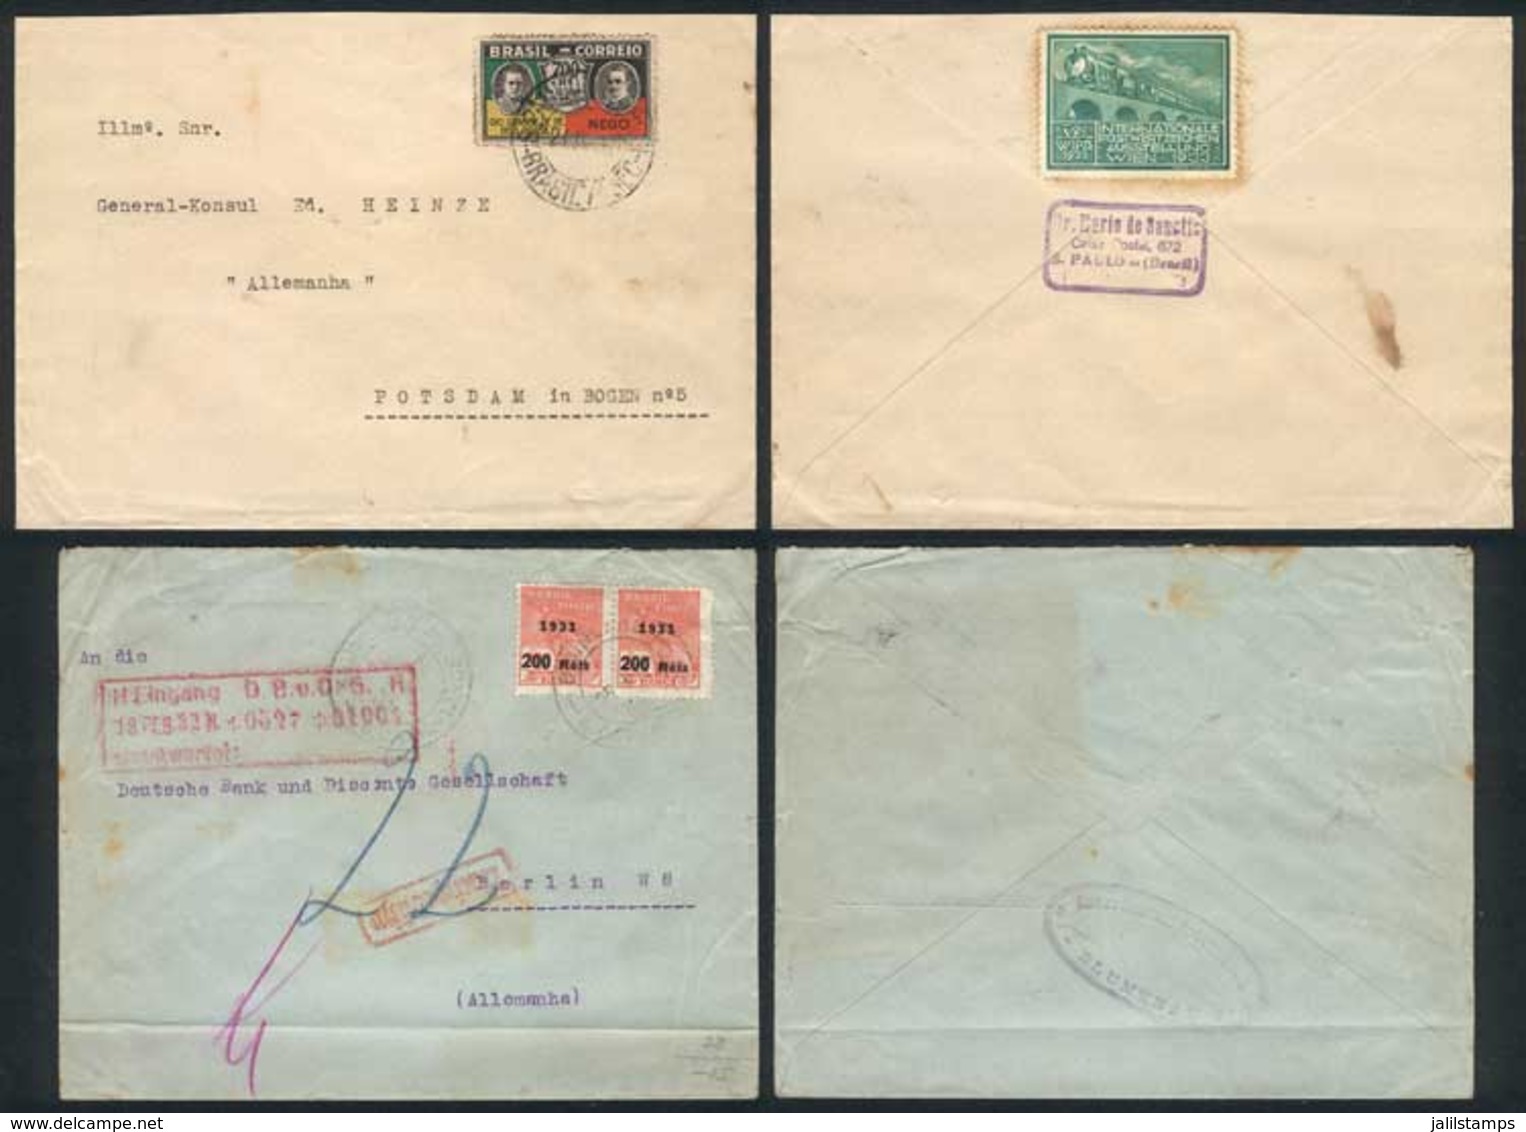 BRAZIL: Lot Of 5 Covers Sent To Germany Between 1928 And 1934, Various Postages And Postmarks, VF Quality! - Briefe U. Dokumente